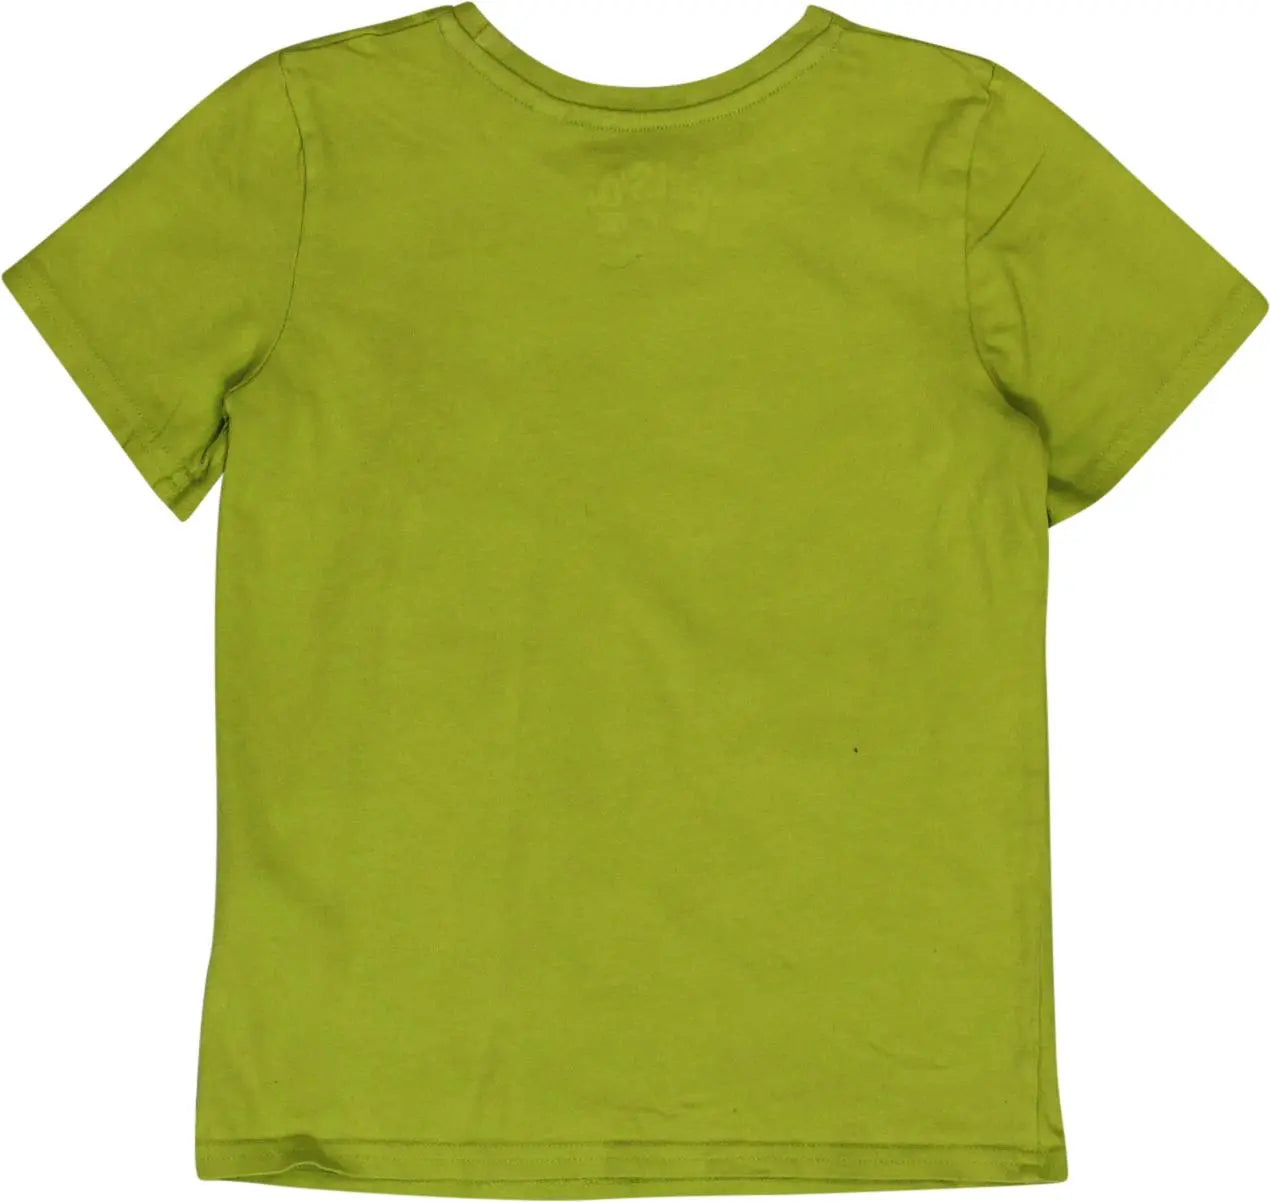 C&A - Green T-shirt- ThriftTale.com - Vintage and second handclothing